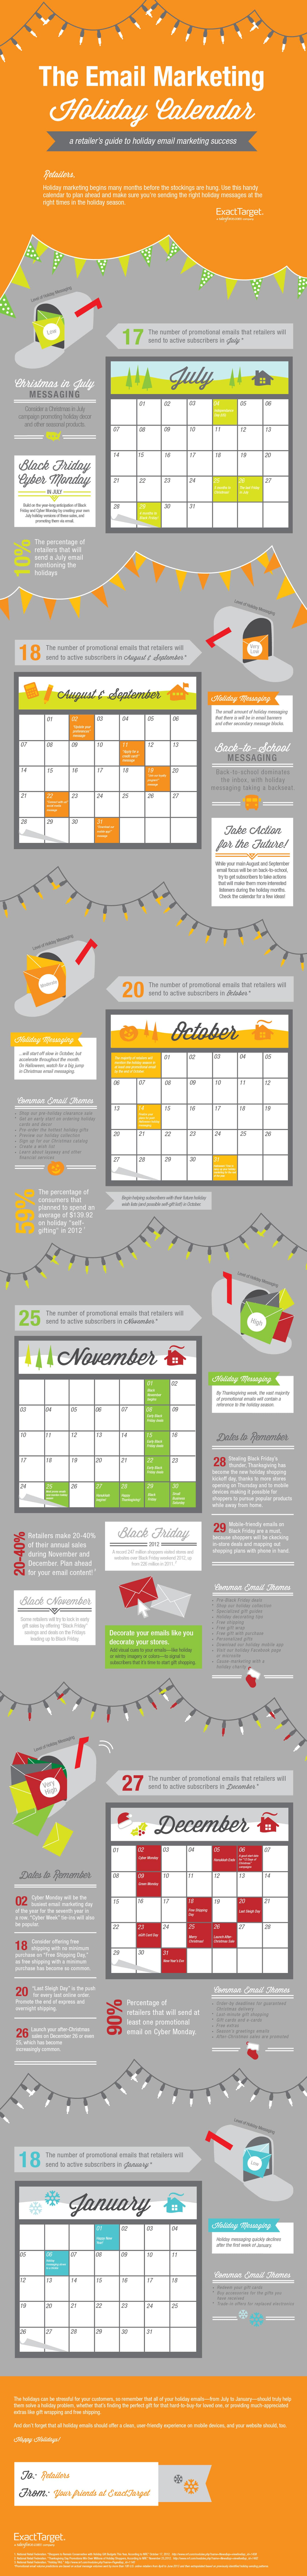 holiday-email-marketing-schedule-infographic